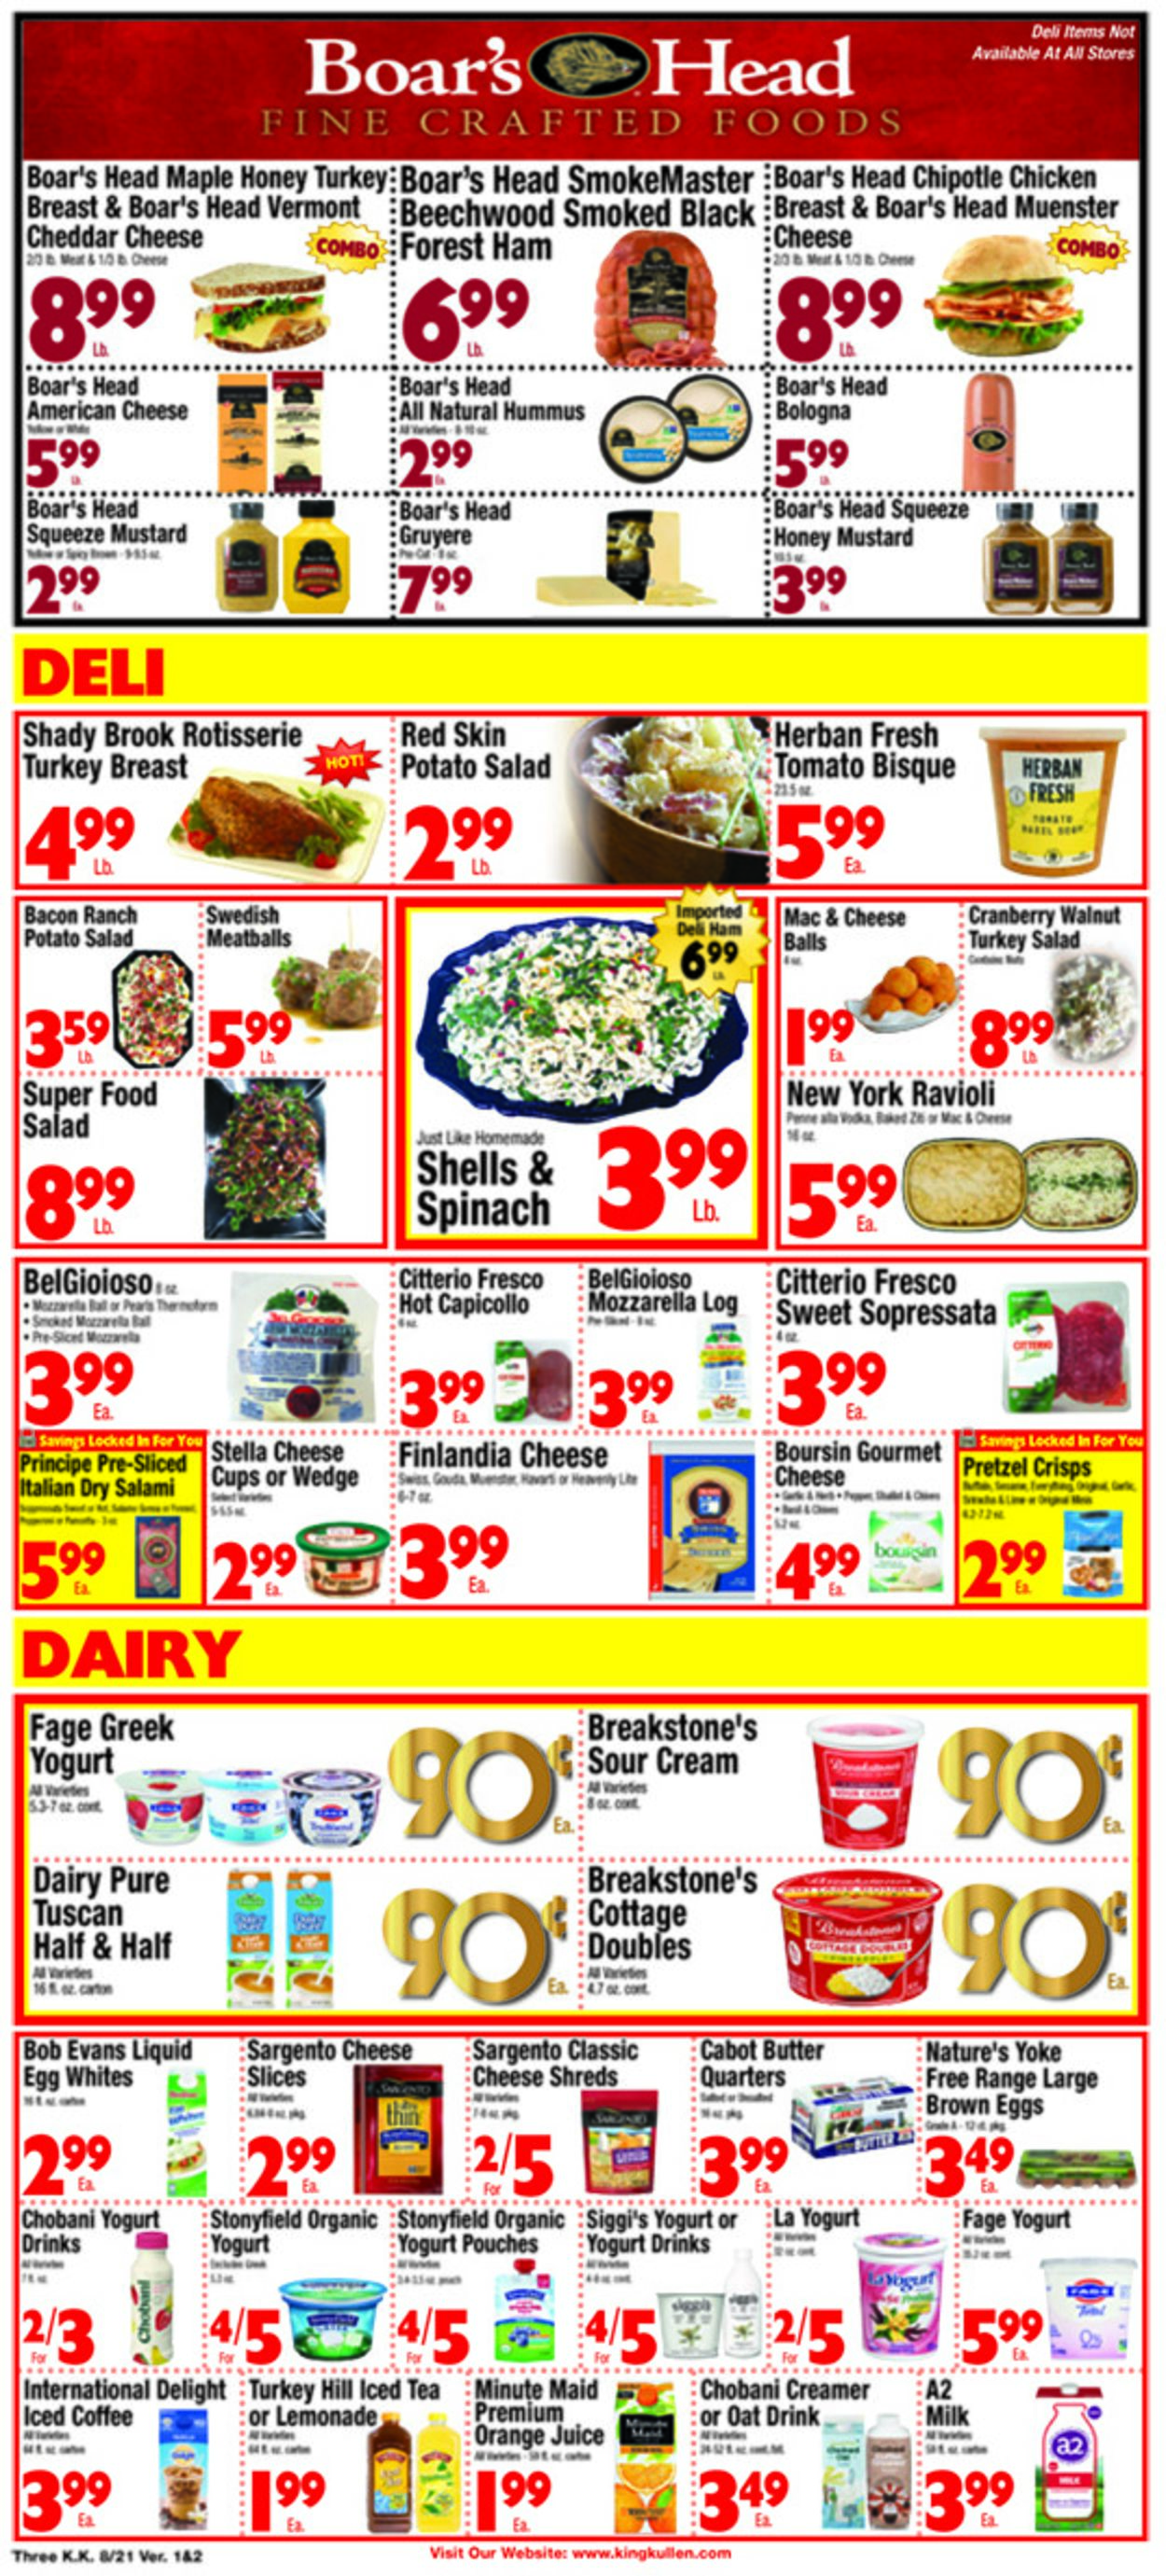 King Kullen Ad from 08/21/2020